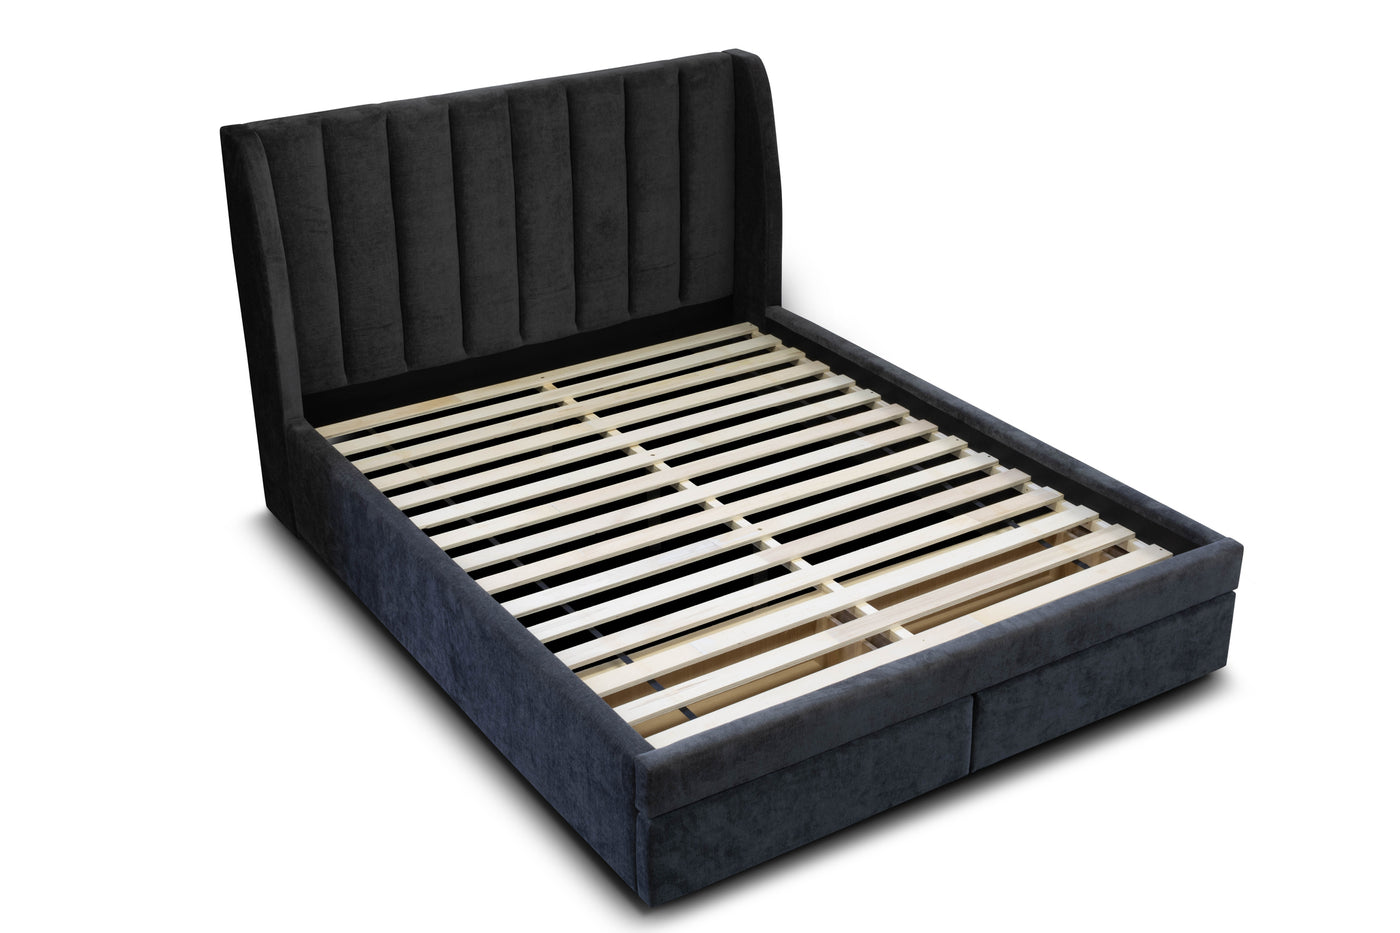 Amalfi 2 Drawer Storage Bed Frame (Licorice Polyester) and Windsor Latex Pocket Spring Mattress Combo Deal (7758154137854)